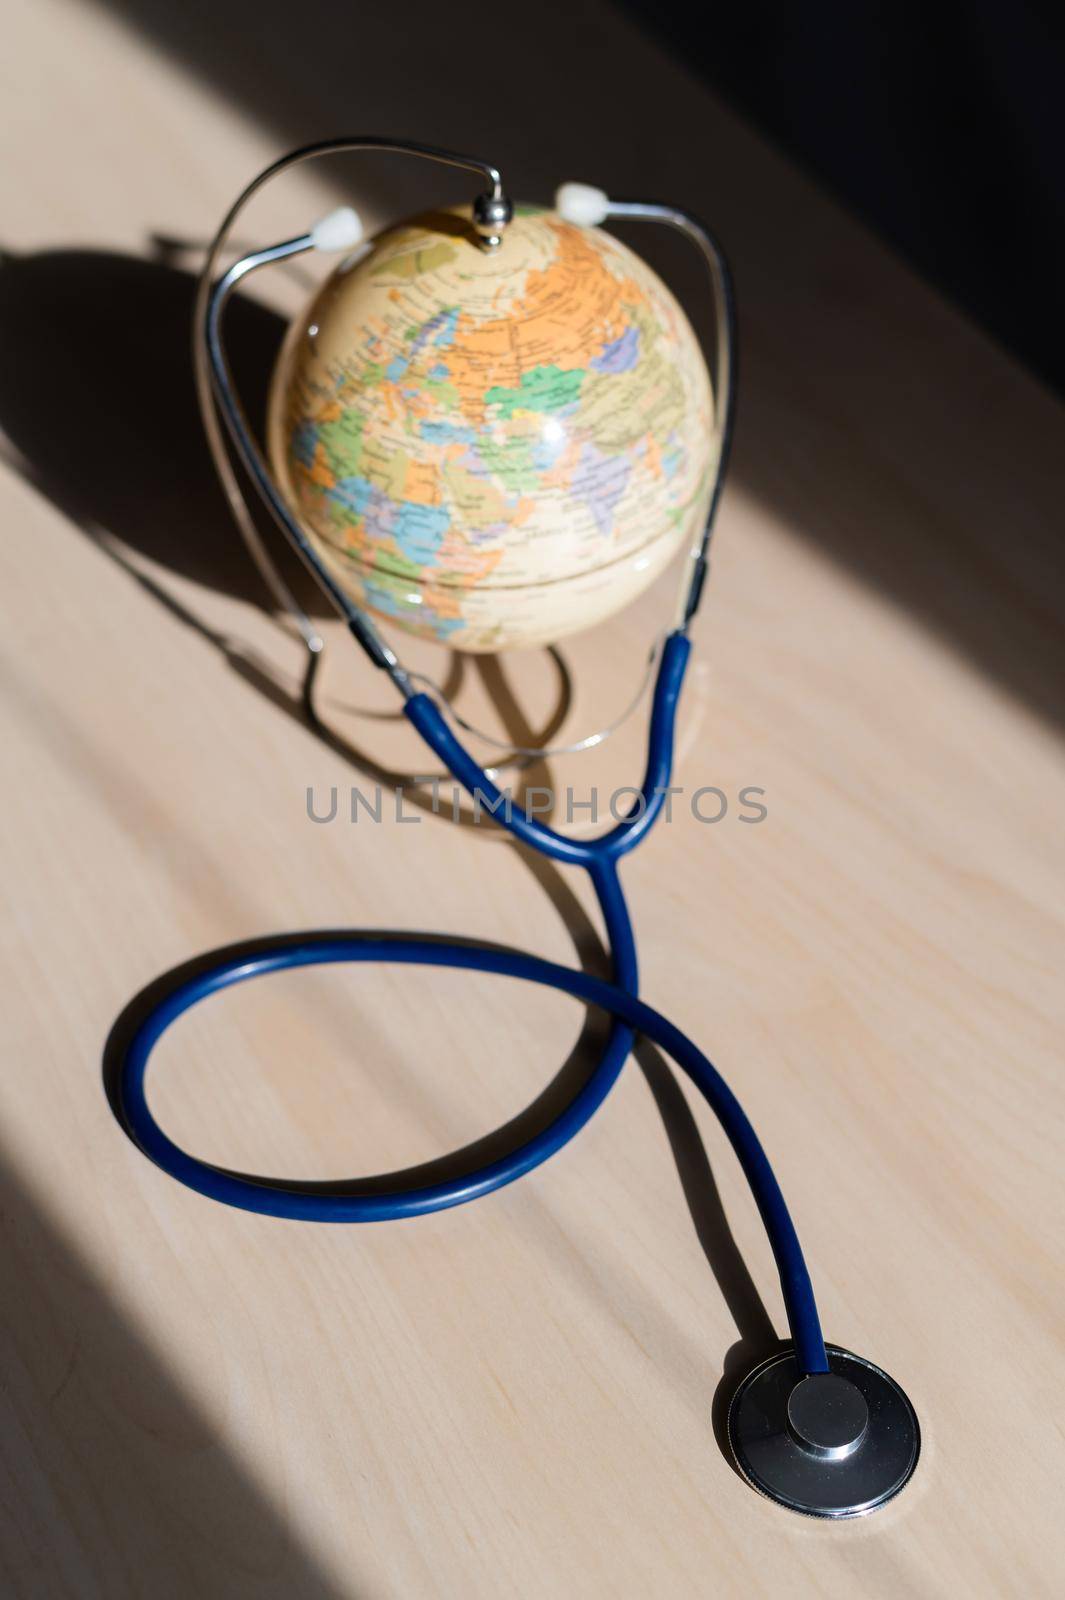 Globe and phonendoscope on the table